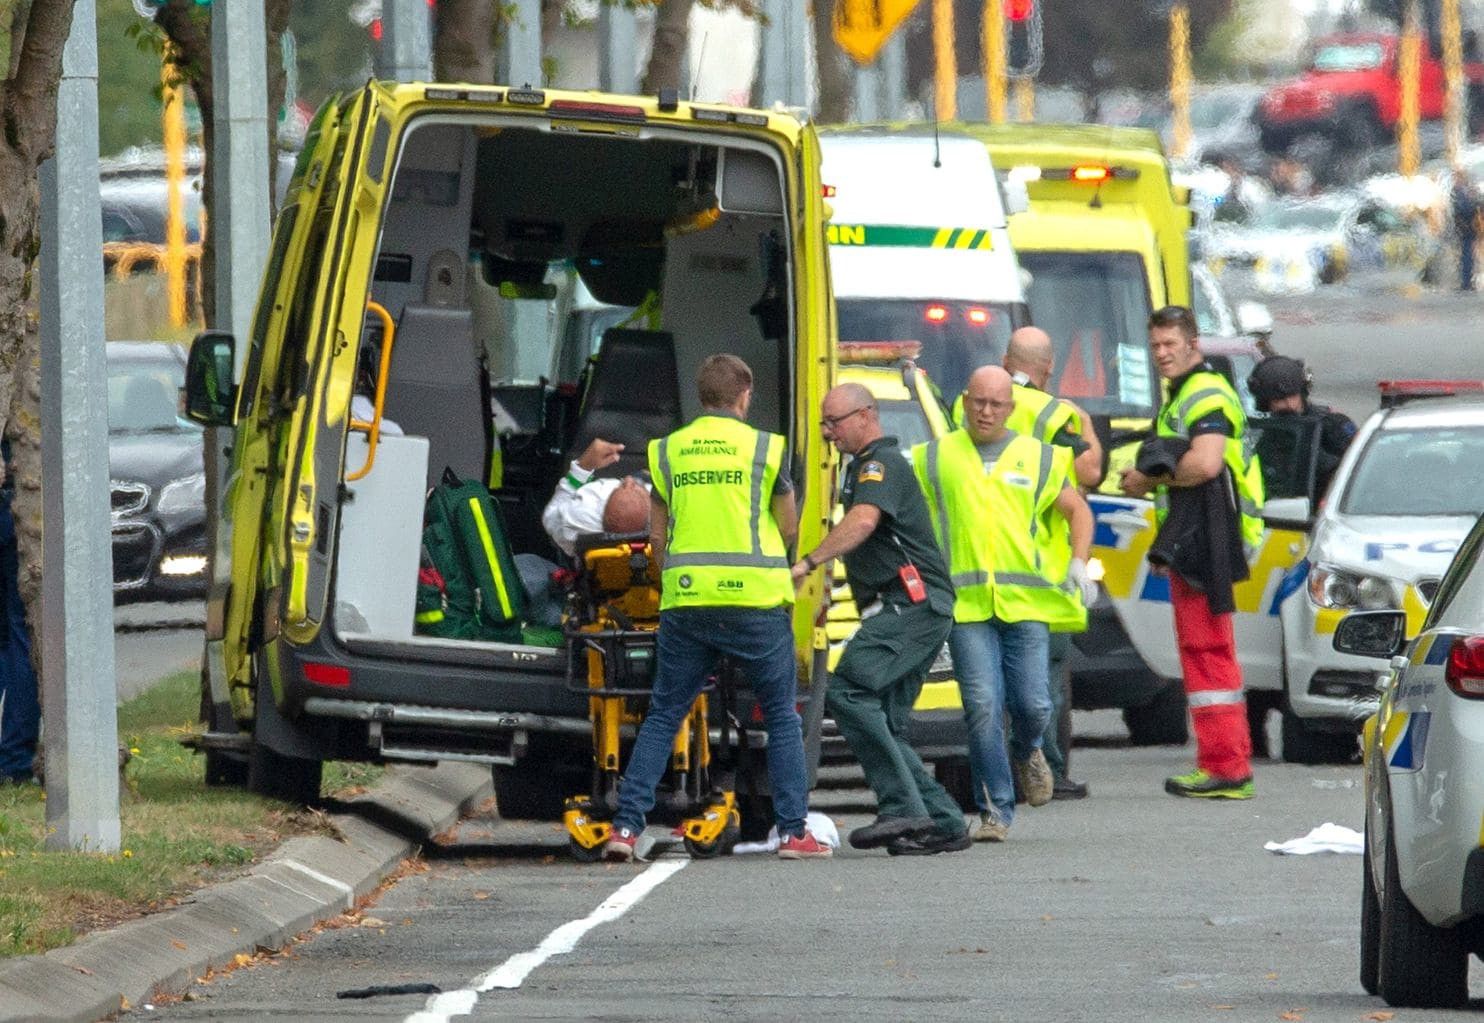 The Conservative Party is incubating the racism behind New Zealand terror